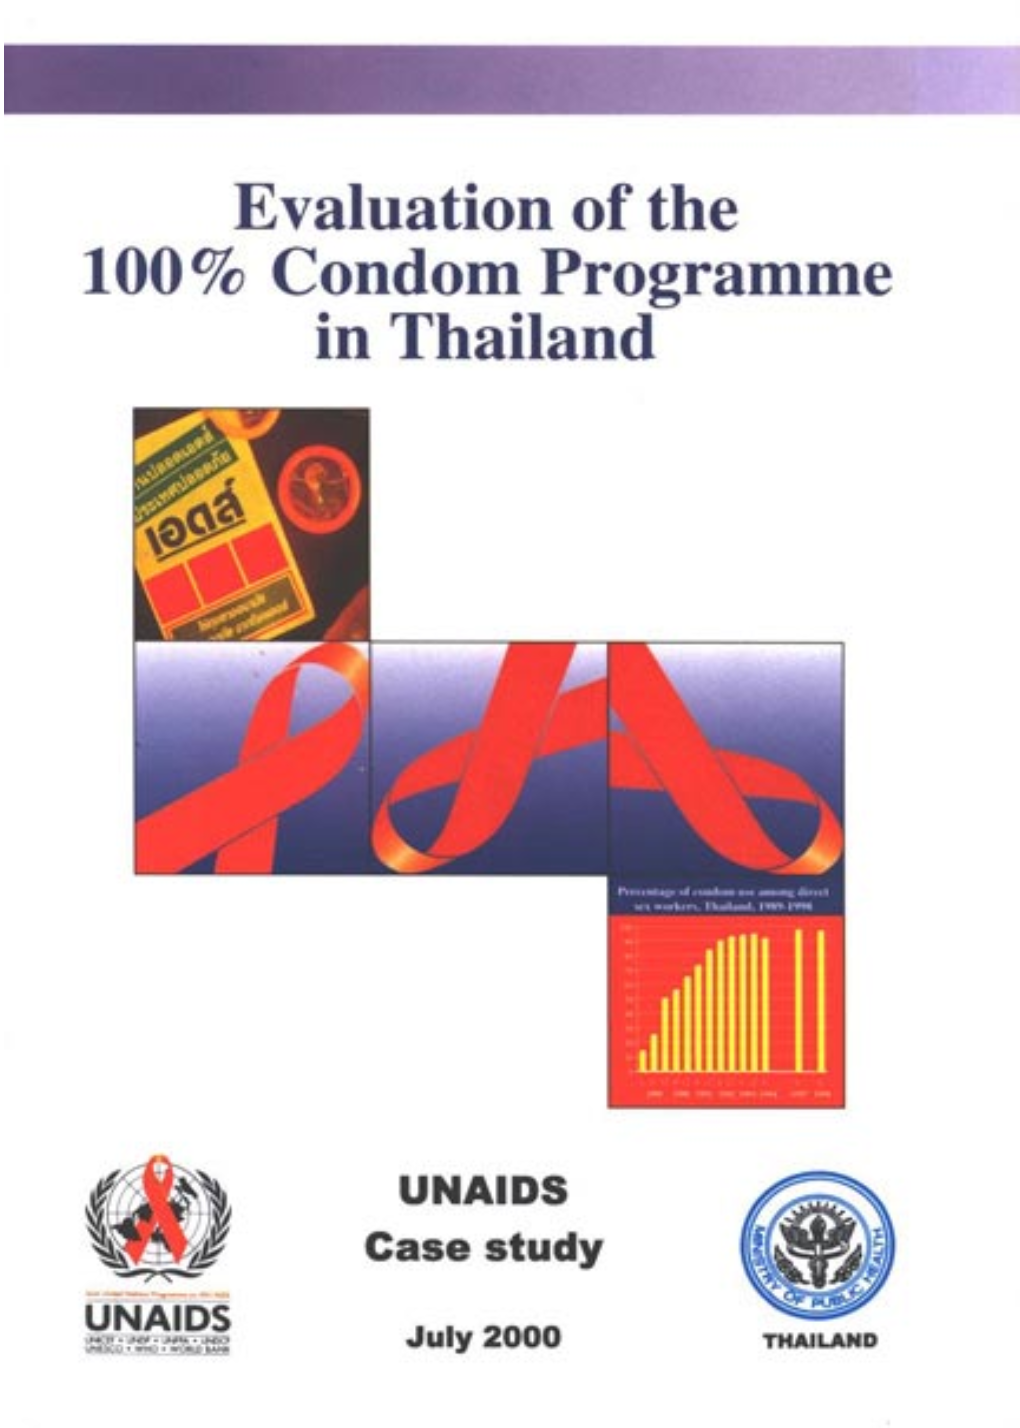 The 100% Condom Programme in Thailand